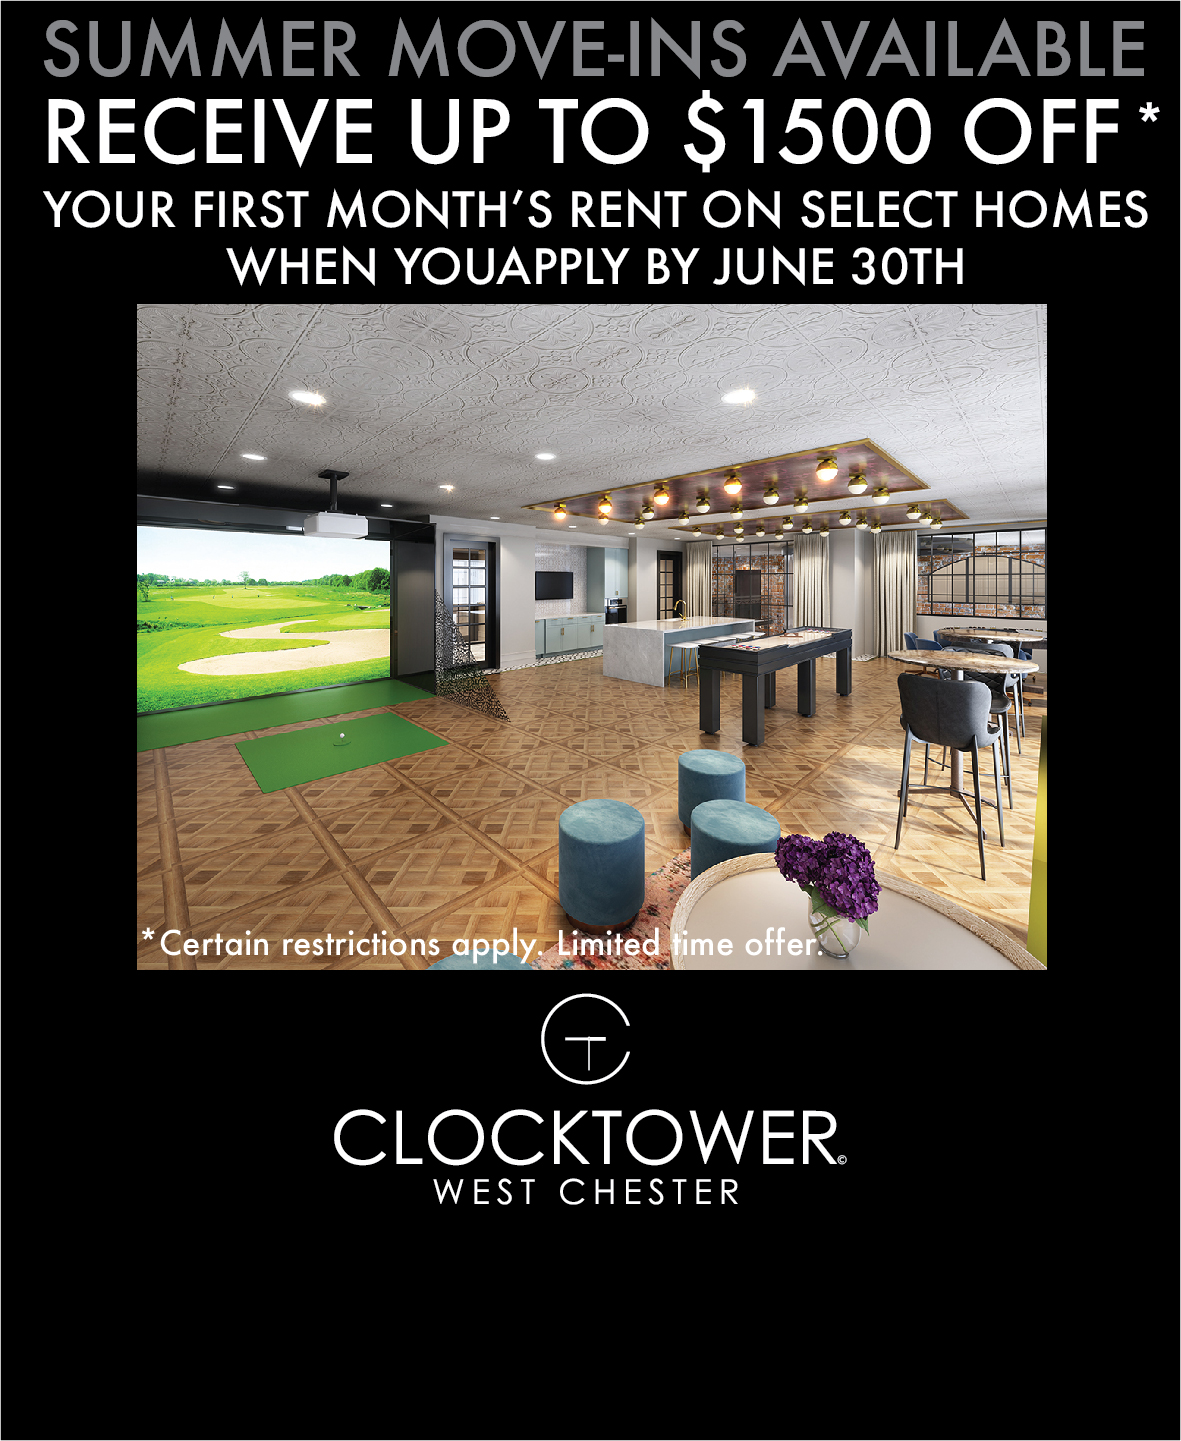 Clocktower Promo for June: Receive $1,500 off your first month's rent